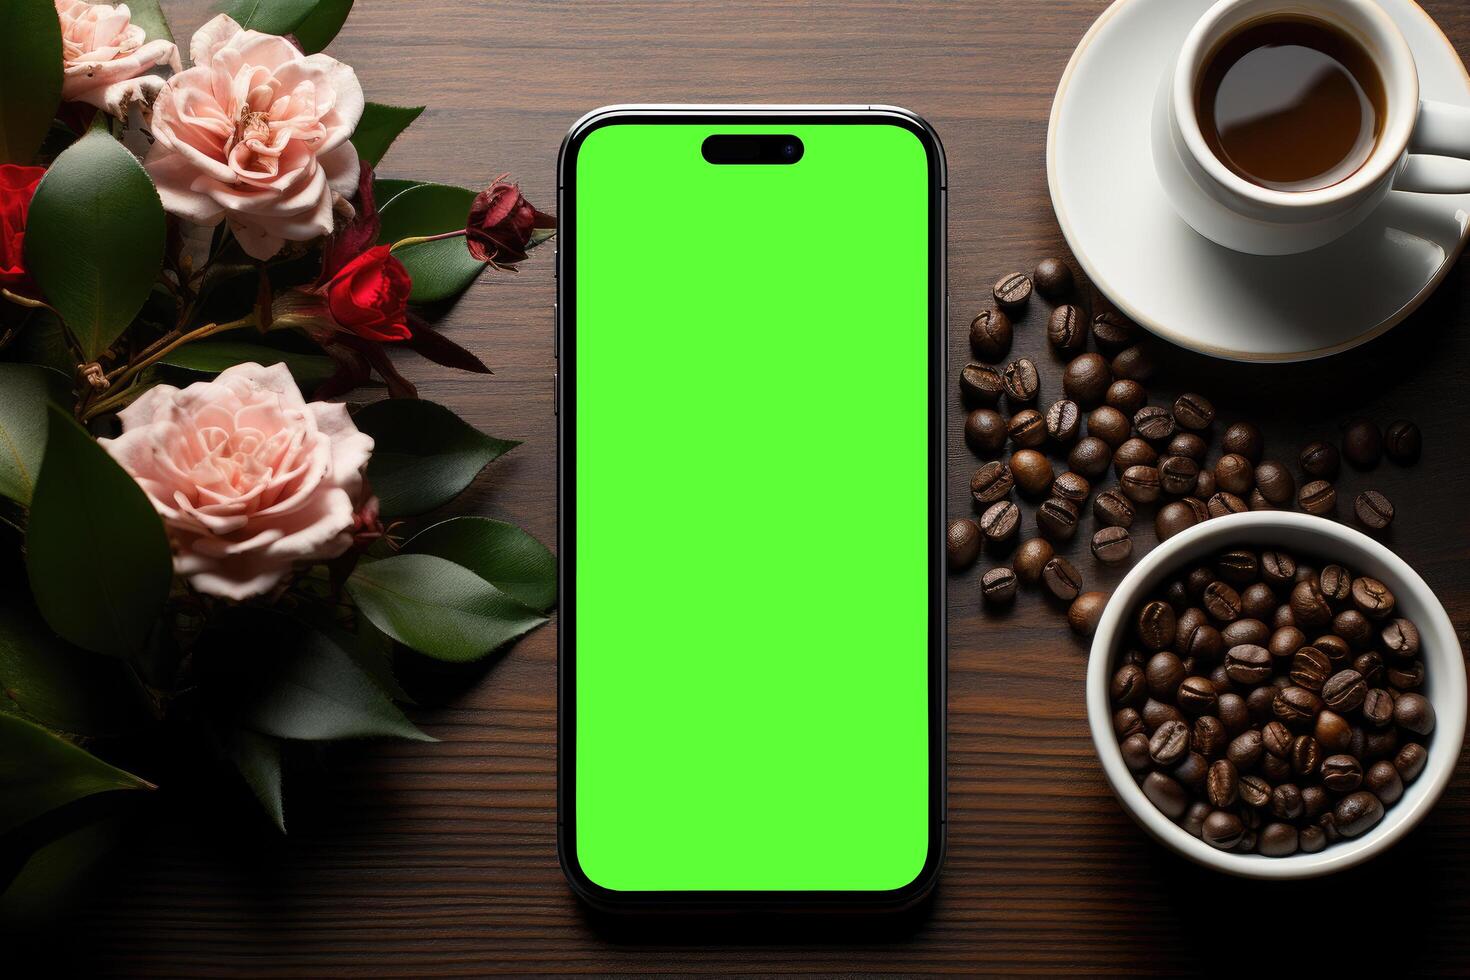 Green screen smartphone surrounded by roses and coffee on wooden surface, ideal for app visualizationBangkok City, Thailand, 2024 - photo